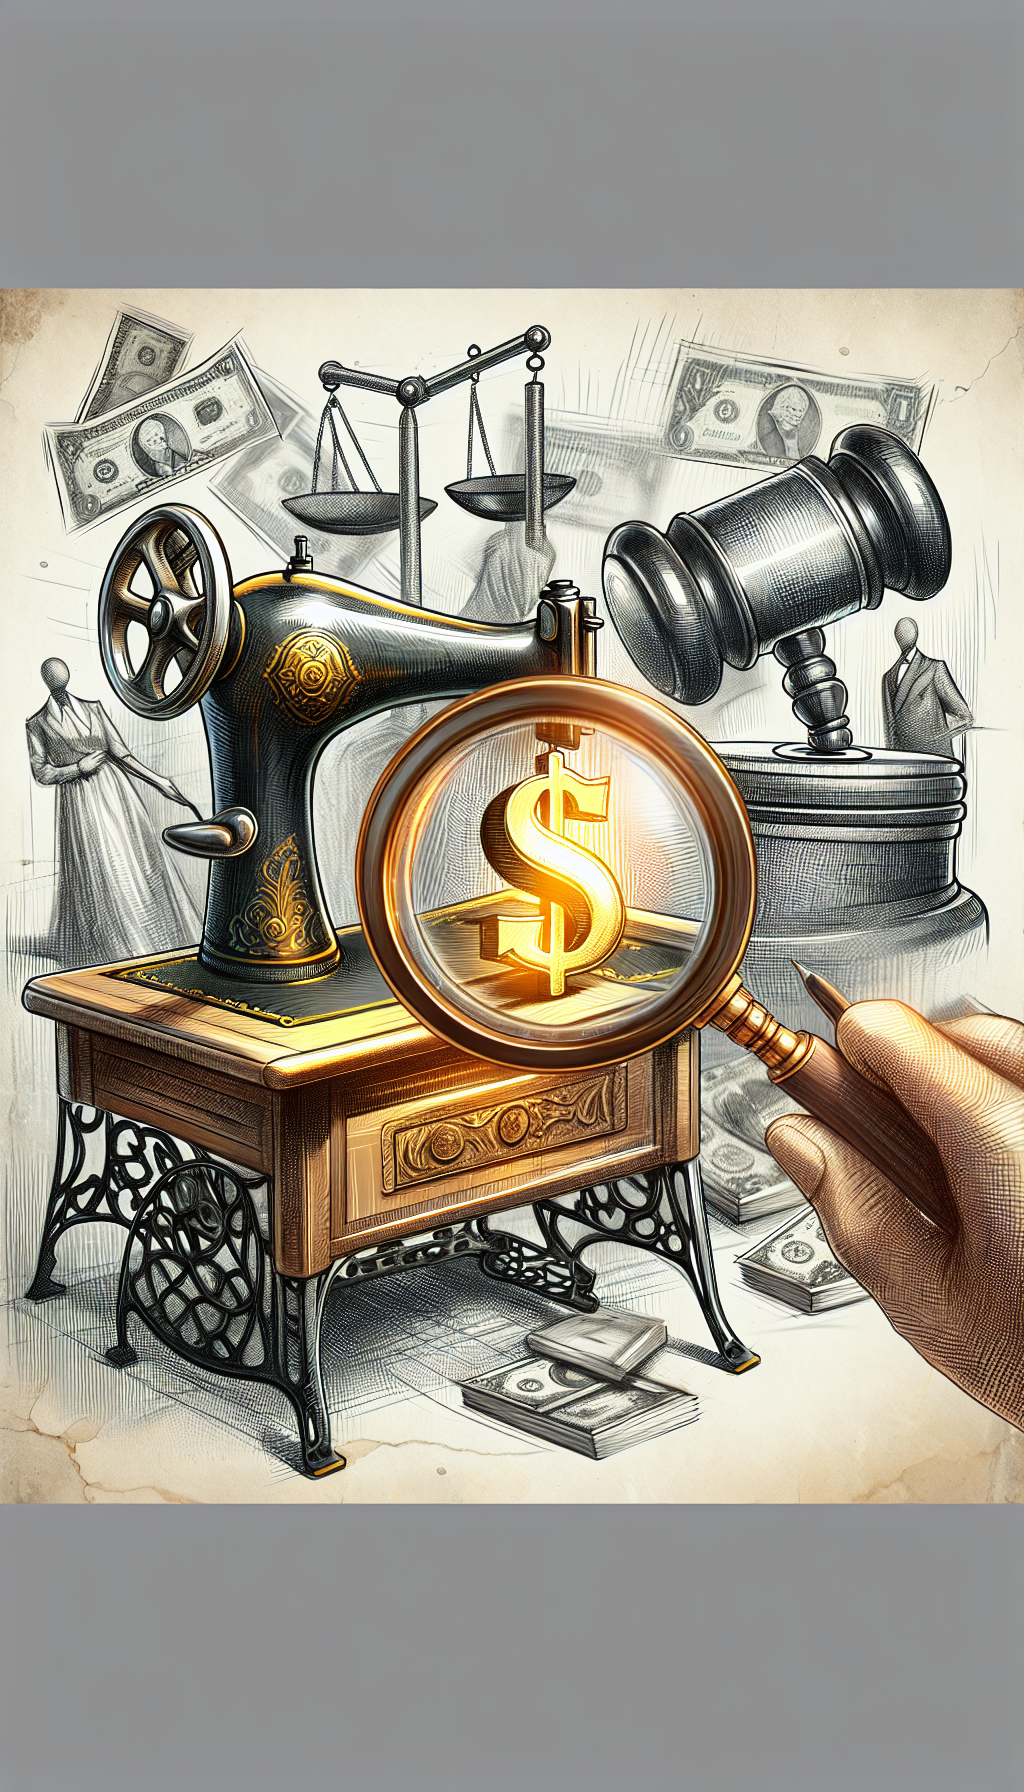 An illustration depicts a magnifying glass hovering over a vintage Singer sewing machine, focusing on an engraved serial number that glows gold. Sketched dollars and auction gavel float above, with the machine's details transitioning from a realistic style near the magnifying glass to impressionistic strokes at the edges, symbolizing the blend of precise history and subjective value.